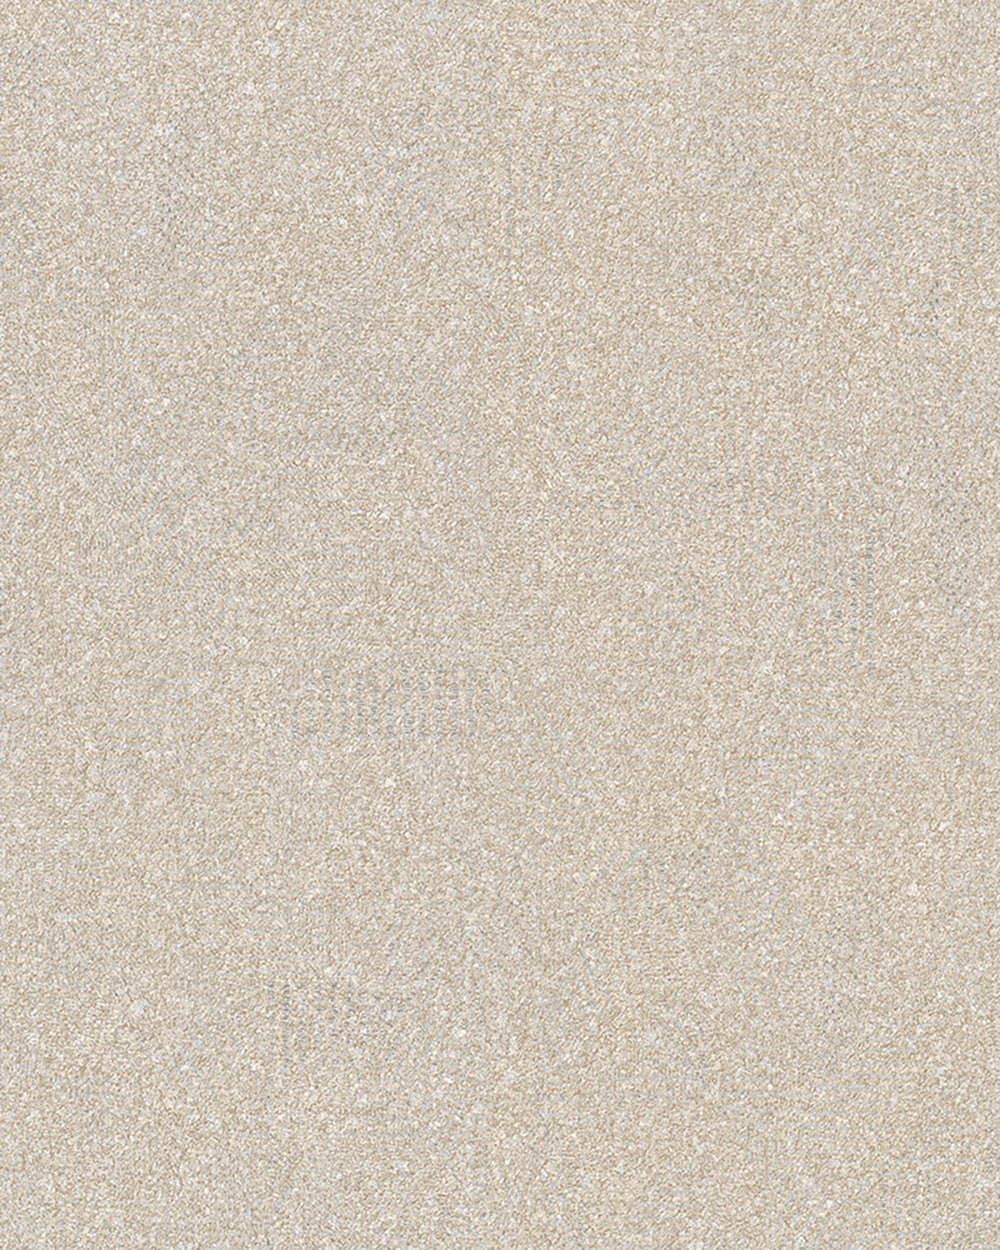 Avalon - Textured Cross Hatched Geo bold wallpaper Marburg Roll Taupe  31622